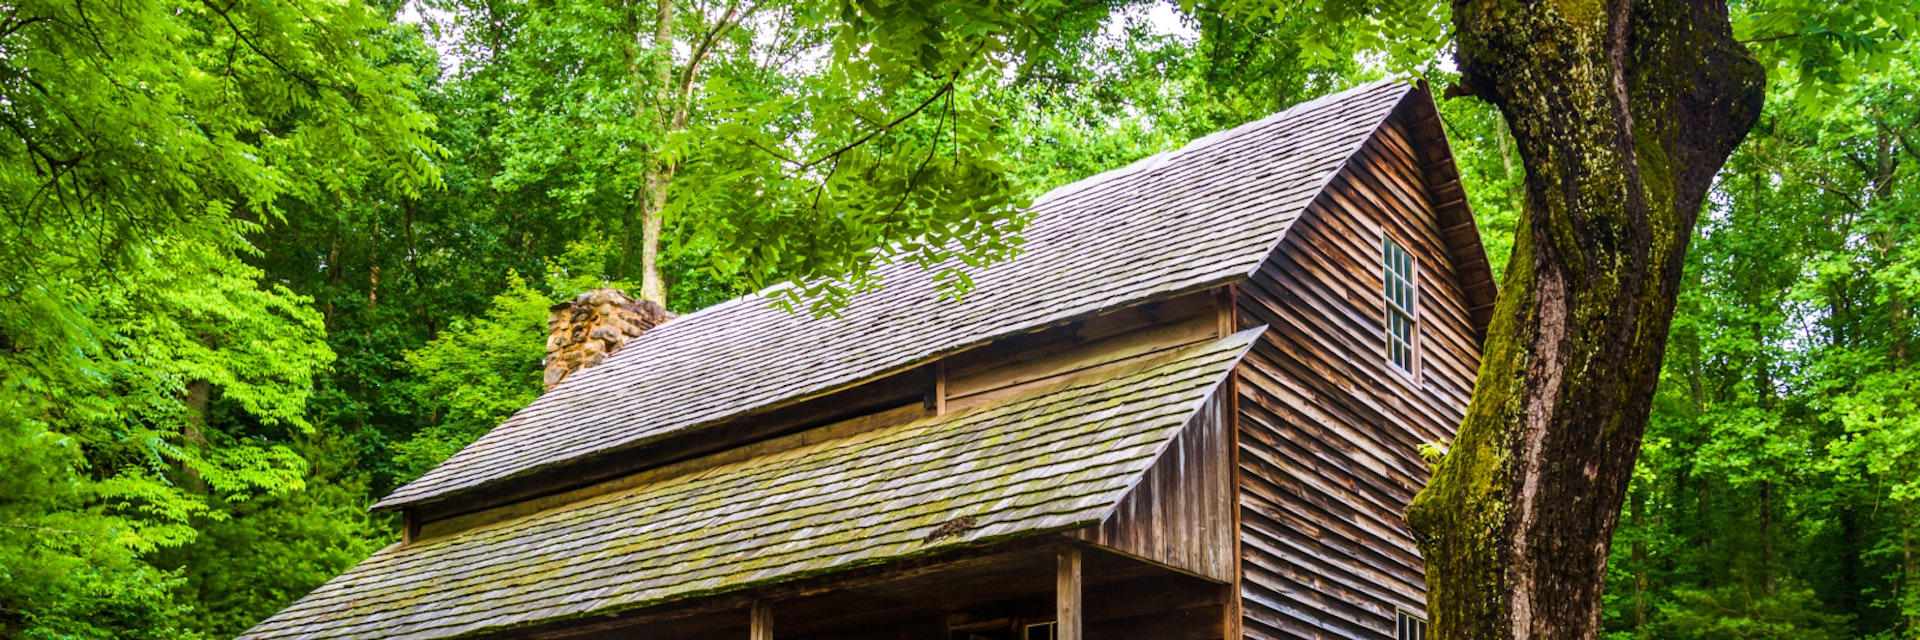 The Henry Whitehead Cabin, at Cade's Cove, Great Smoky Mountains National Park, Tennessee.